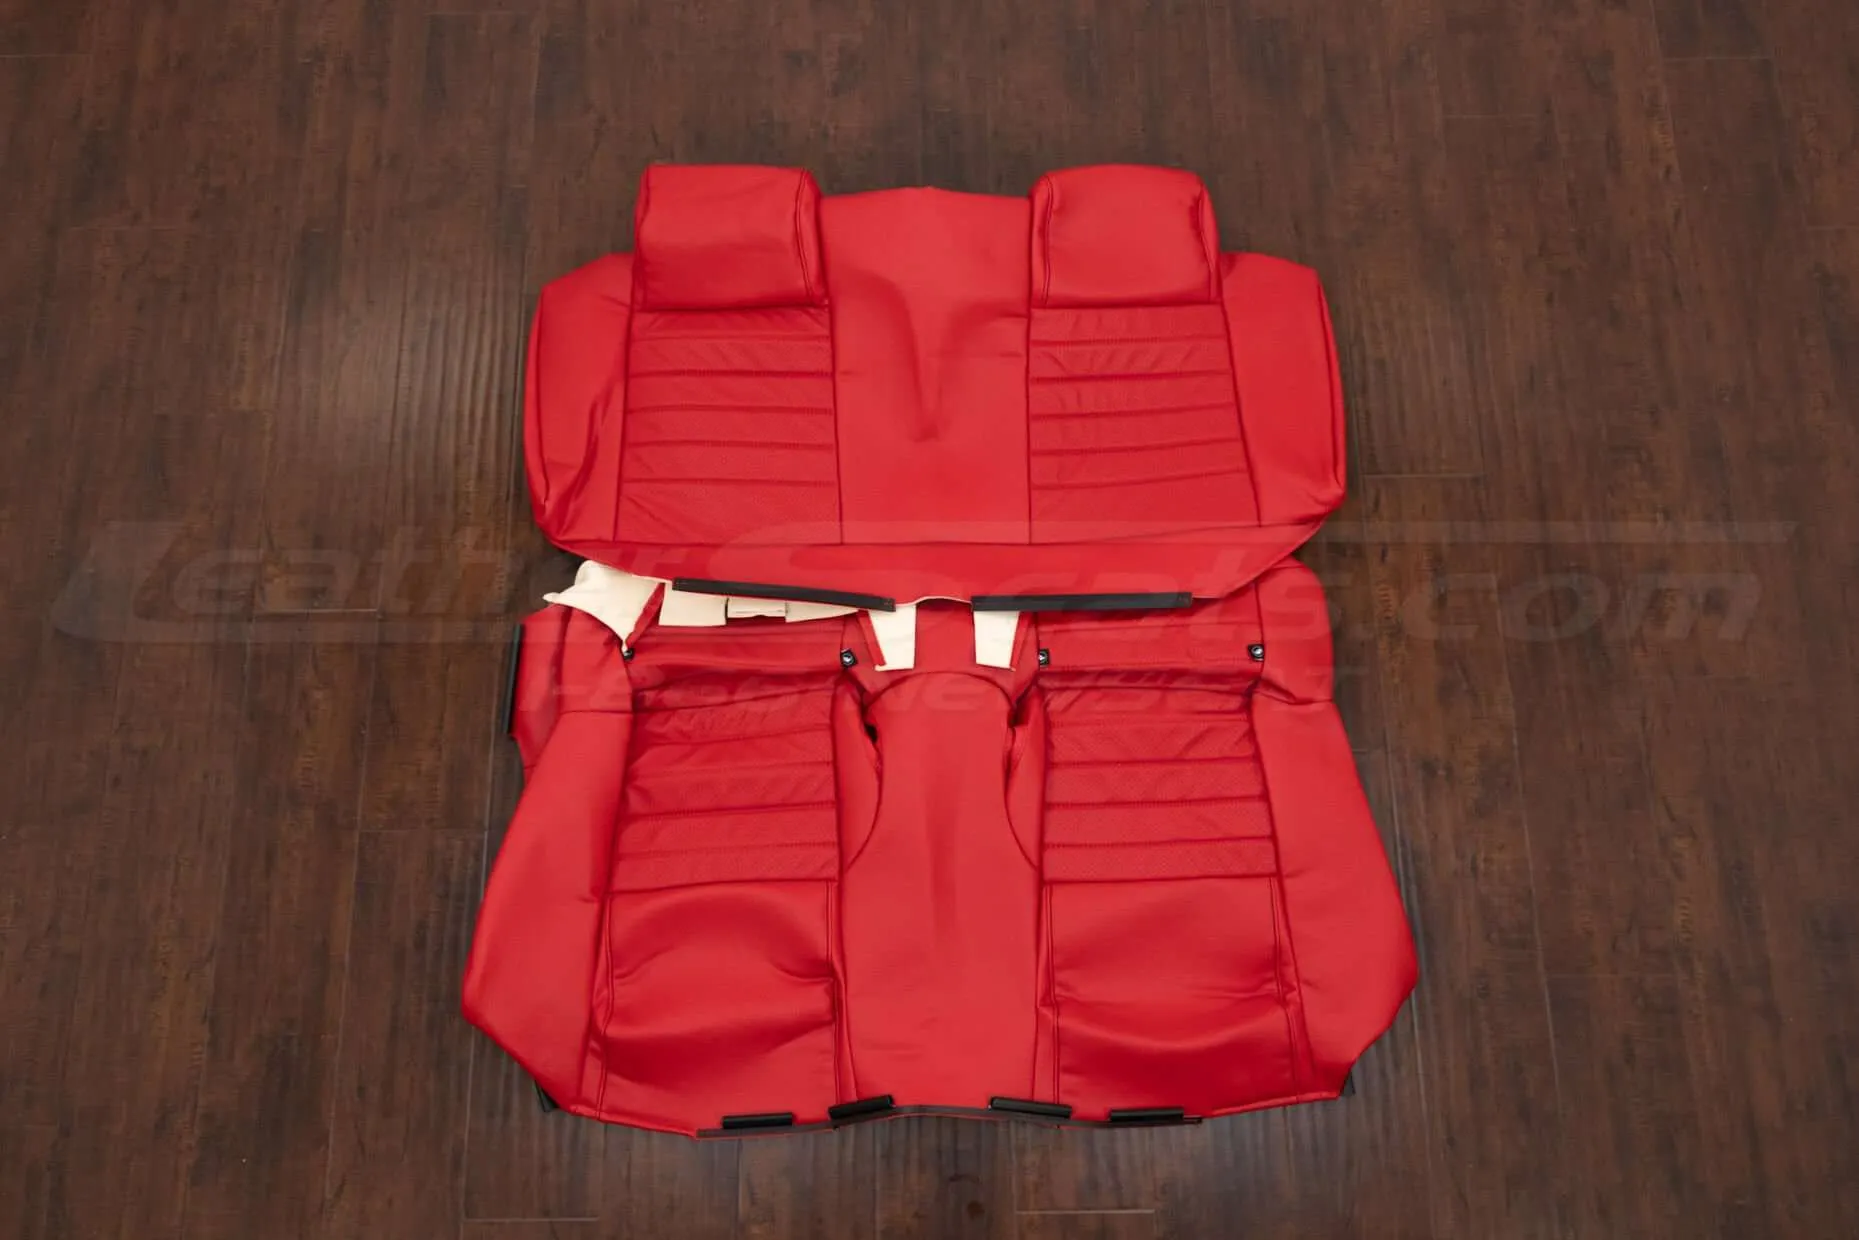 2005-2009 Ford Mustang Convertible Leather Kit - Bright Red - Rear seat upholstery